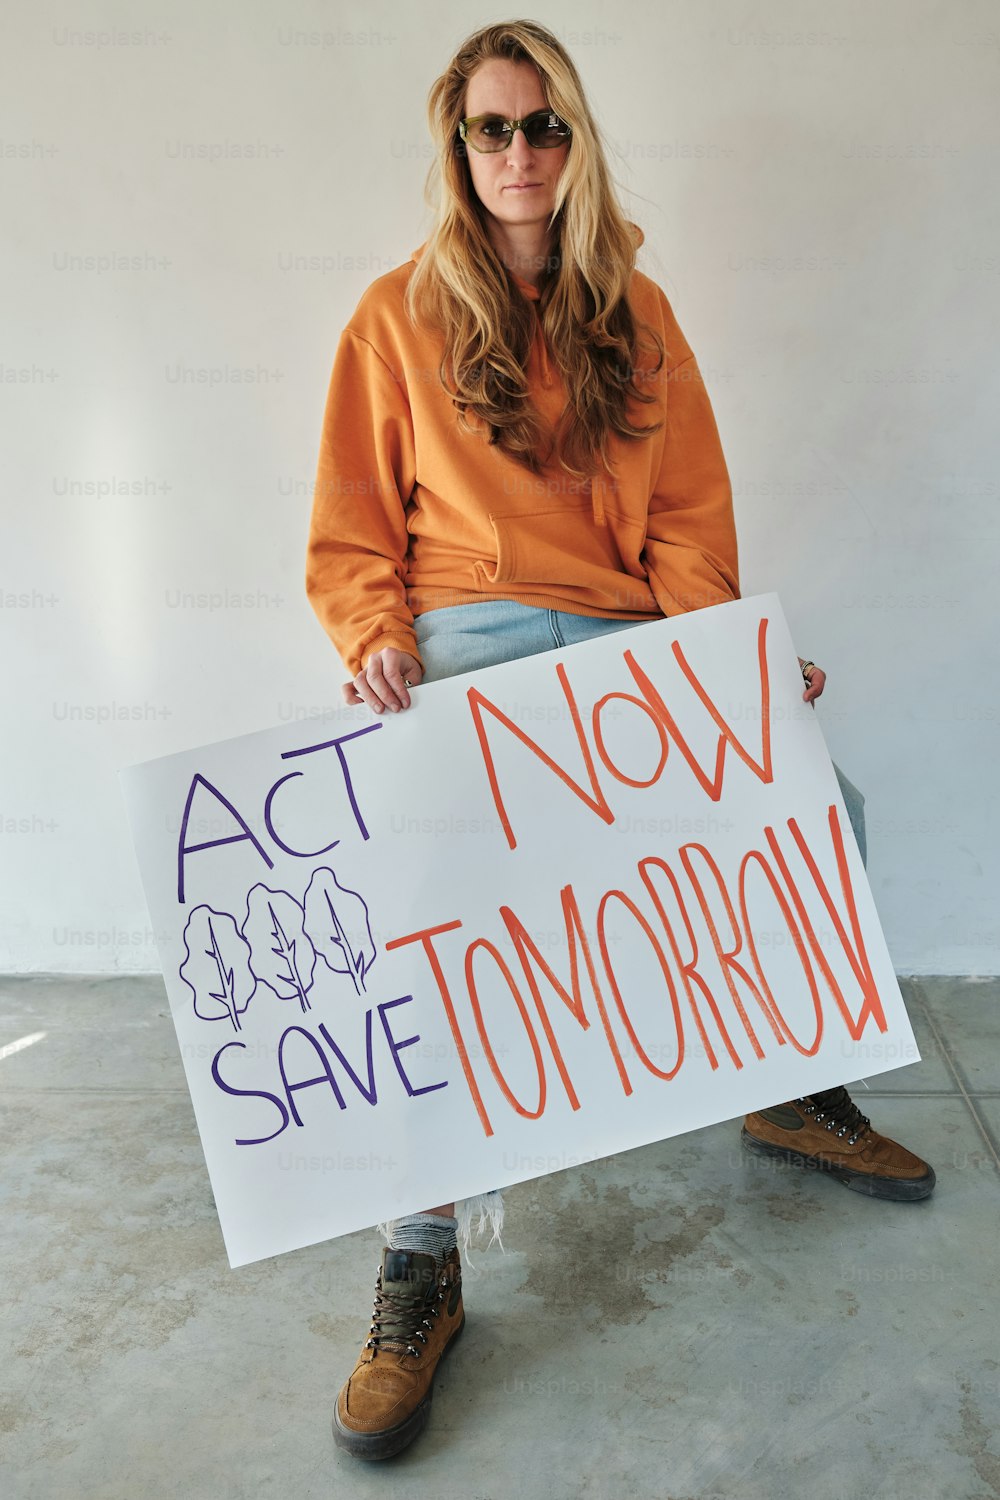 a woman holding a sign that says act now save tomorrow